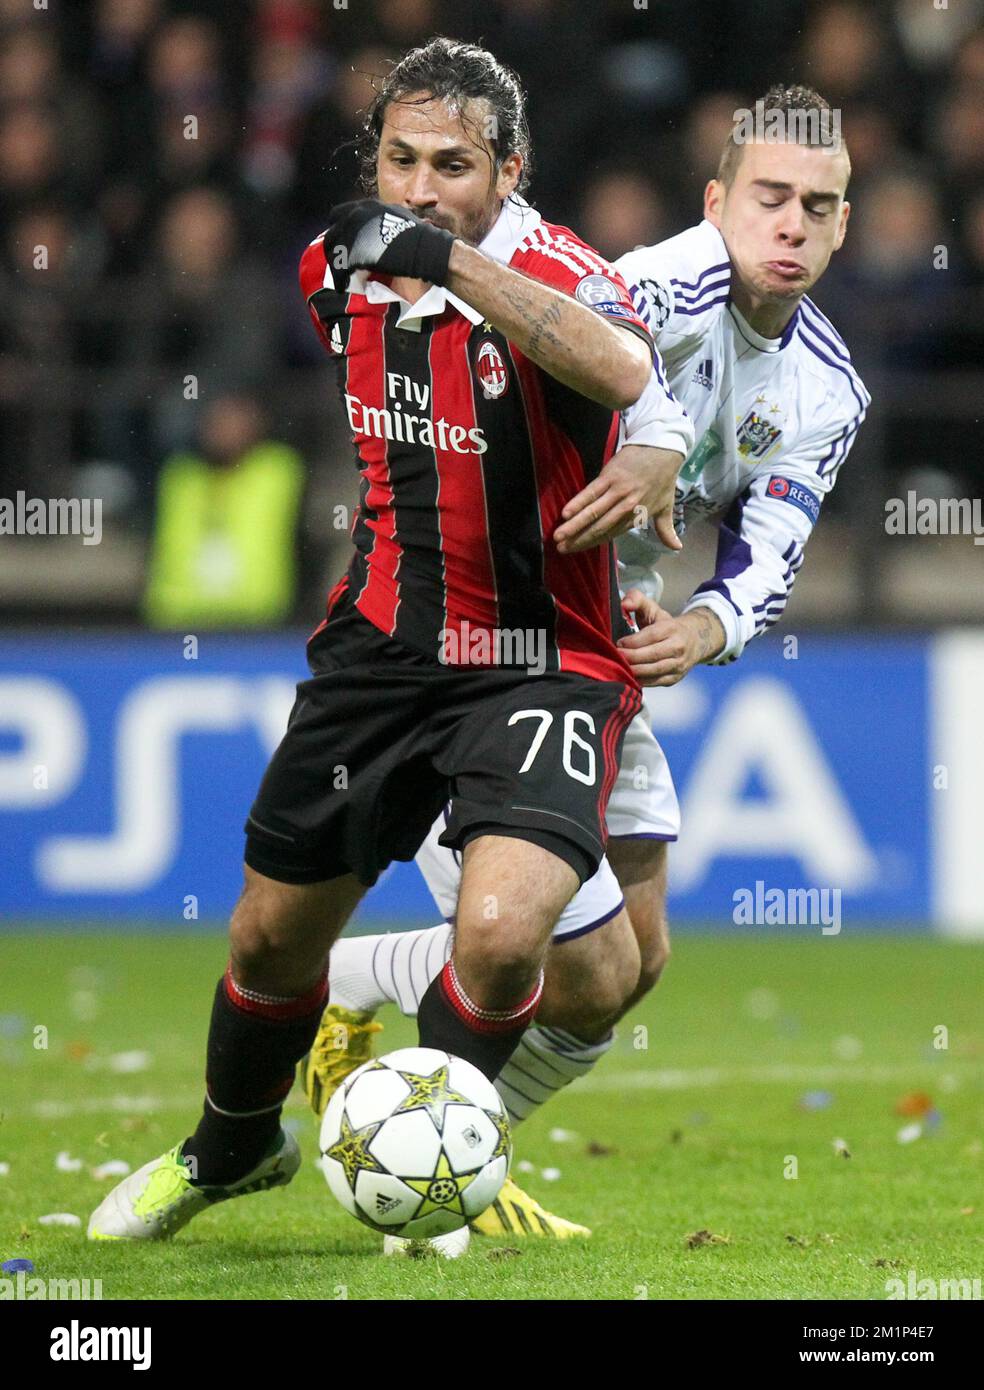 20121121 - BRUSSELS, BELGIUM: Milan's Mario Yepes and Anderlecht's Massimo Bruno fight for the ball during the football game between Belgian RSC Anderlecht and Italian AC Milan, on the fifth day of the group C of Champions League group C Wednesday 21 November 2012 in Brussels.  BELGA PHOTO VIRGINIE LEFOUR Stock Photo